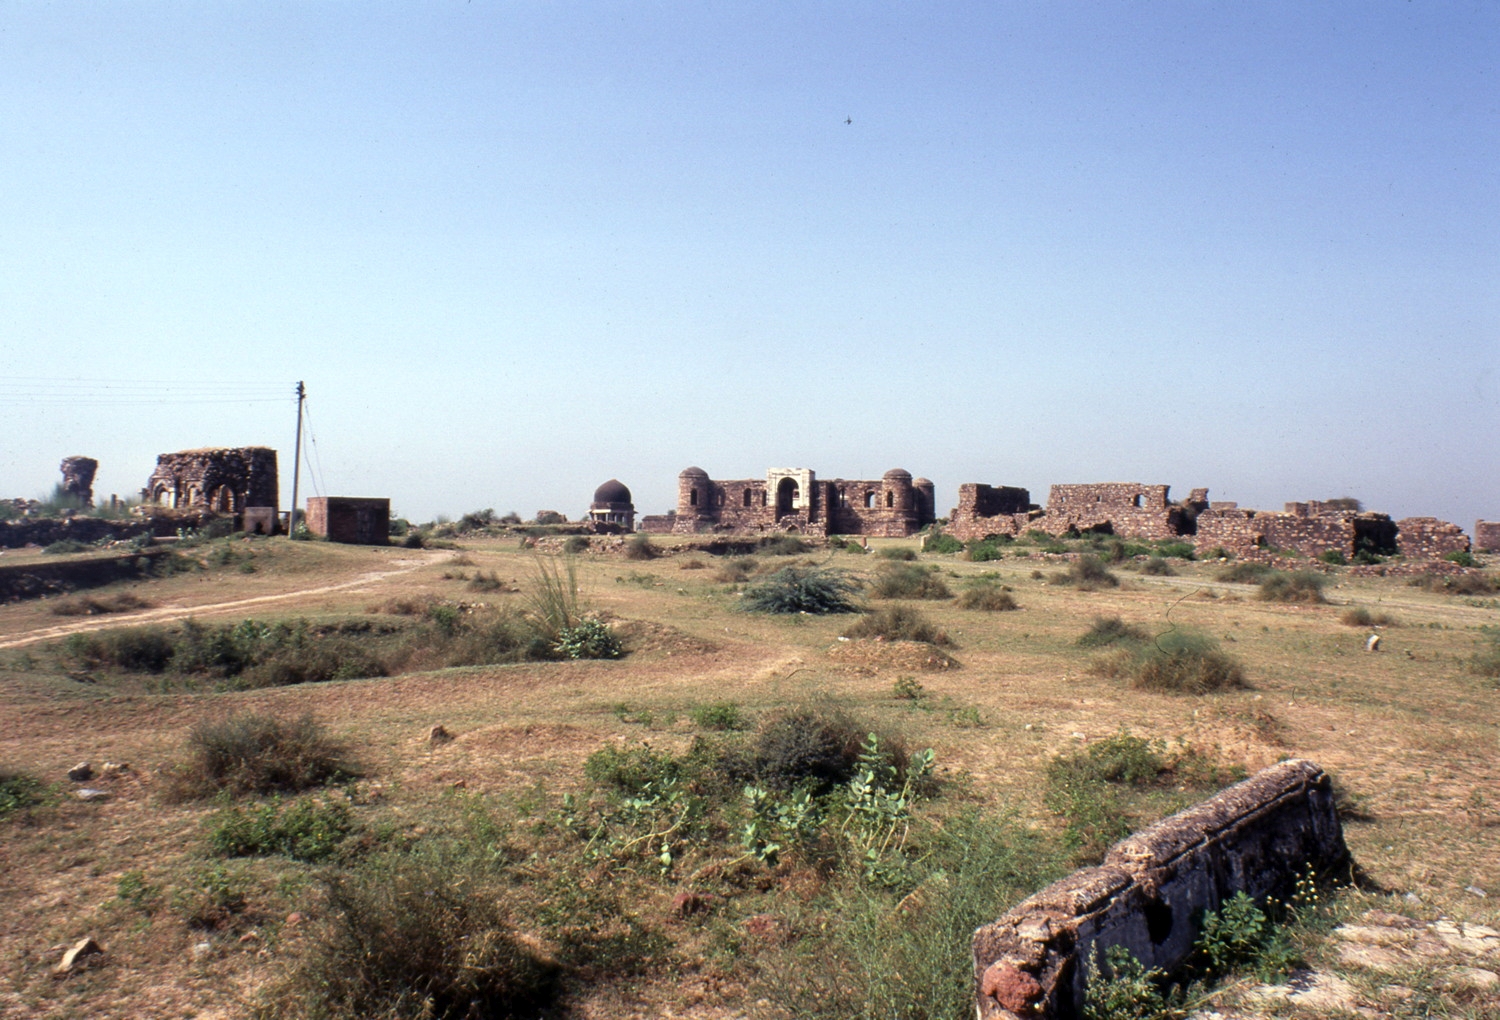 Distant view, tomb in setting